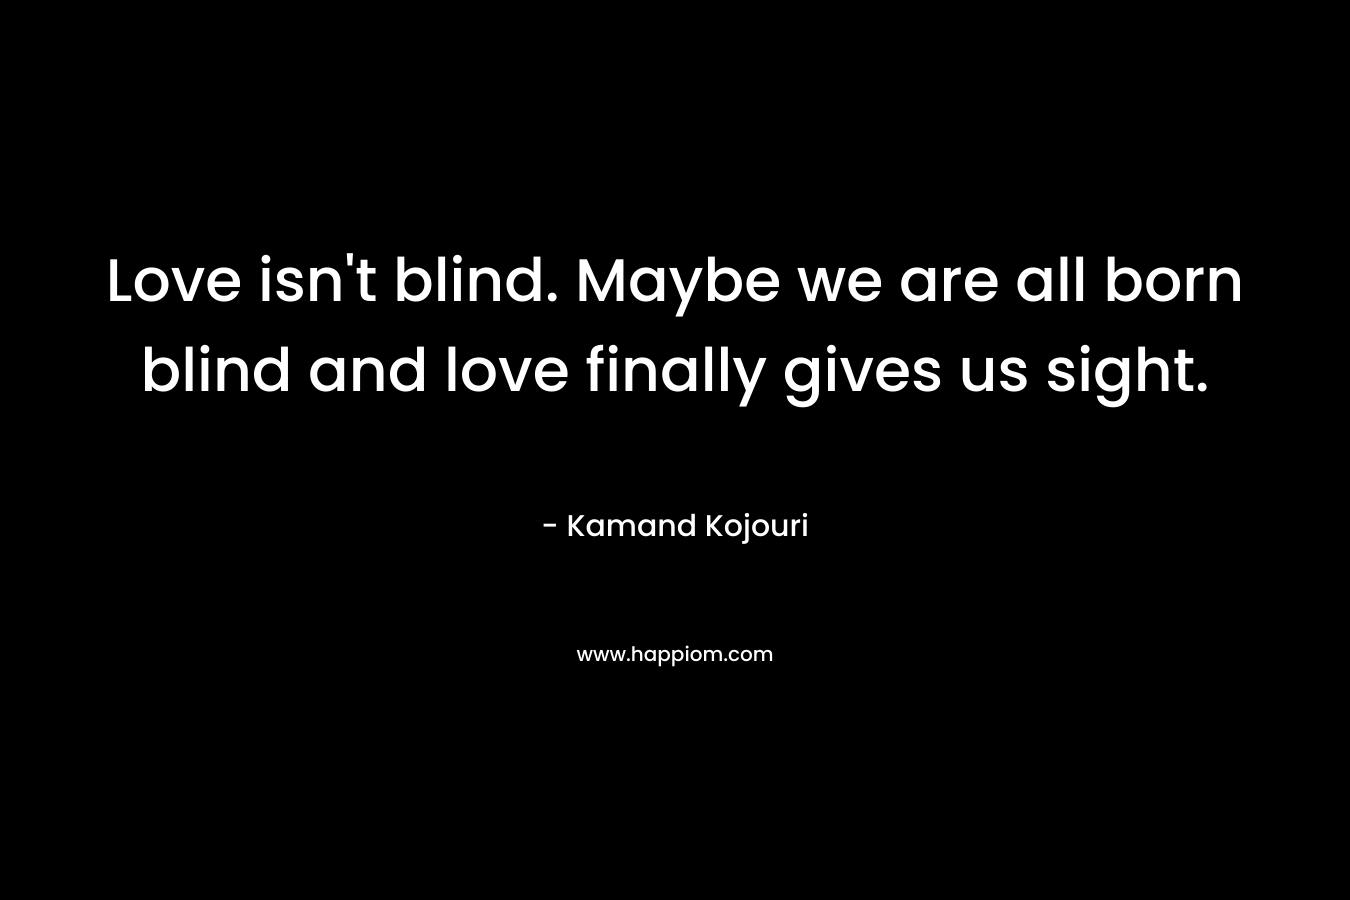 Love isn't blind. Maybe we are all born blind and love finally gives us sight.